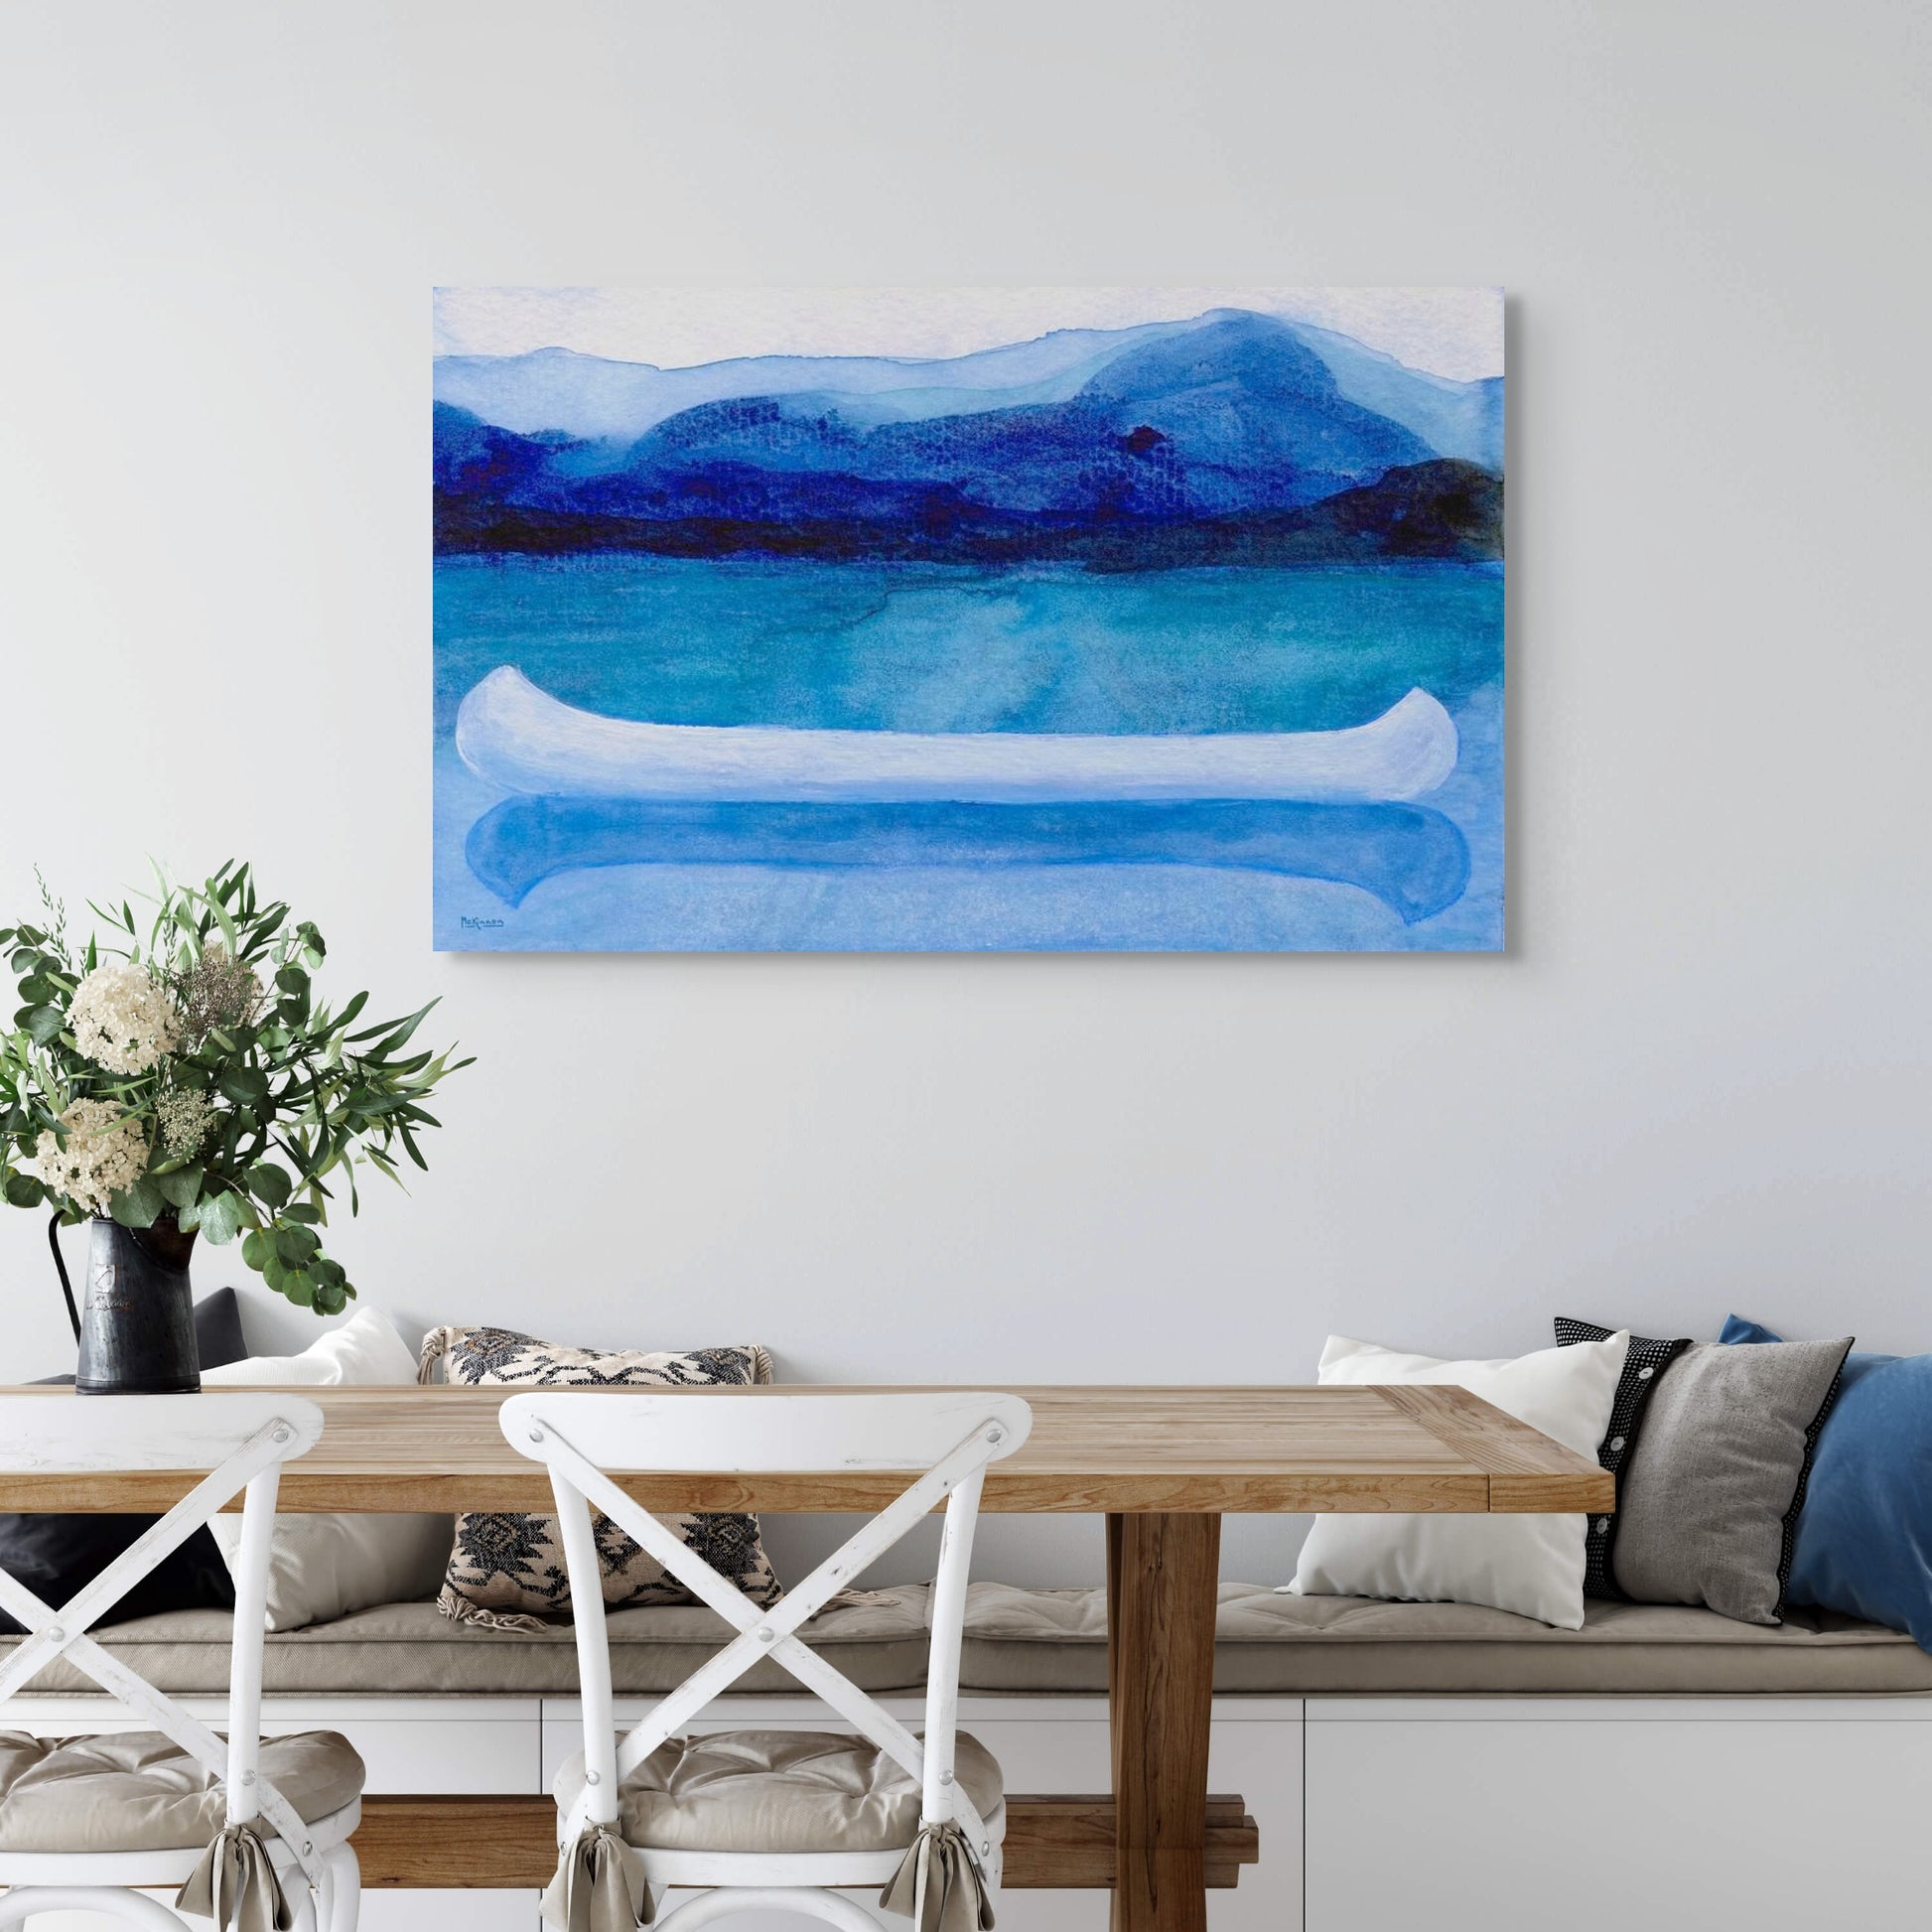 A work of canoeing art by Canadian artist Catherine McKinnon. The watercolor depicts a small white boat, a "canoe", on blue water with a dark blue distant shore and lighter blue distant moutains. The giclee print is frameless and is mounted on a white wall above a modern farmhouse table.